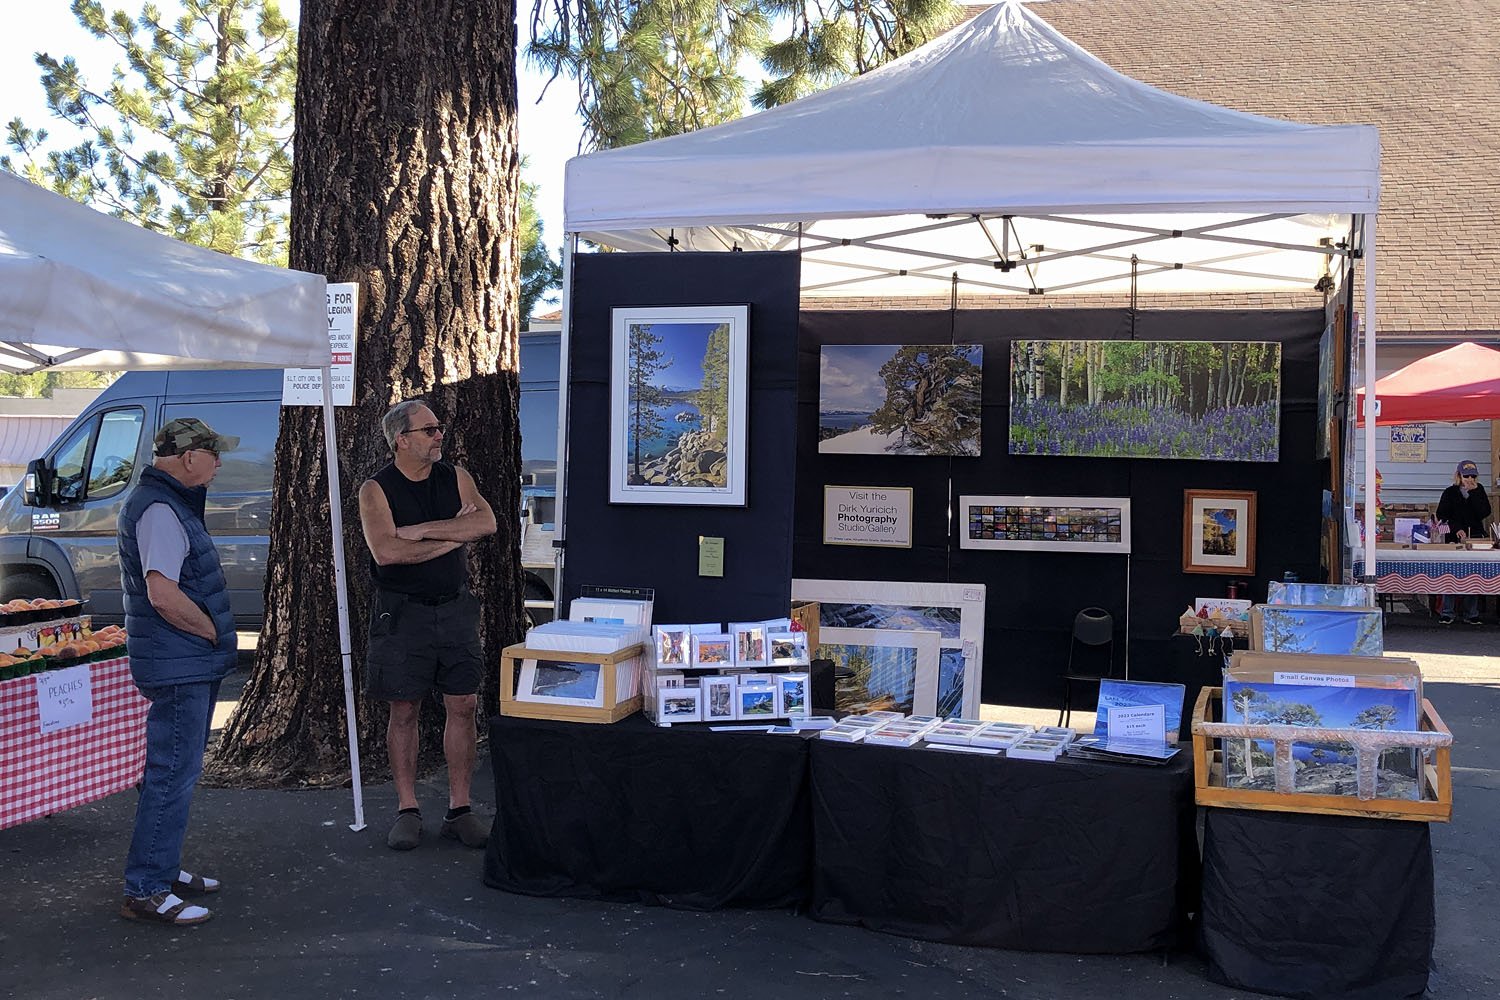 Our booth at the Farmers Market,